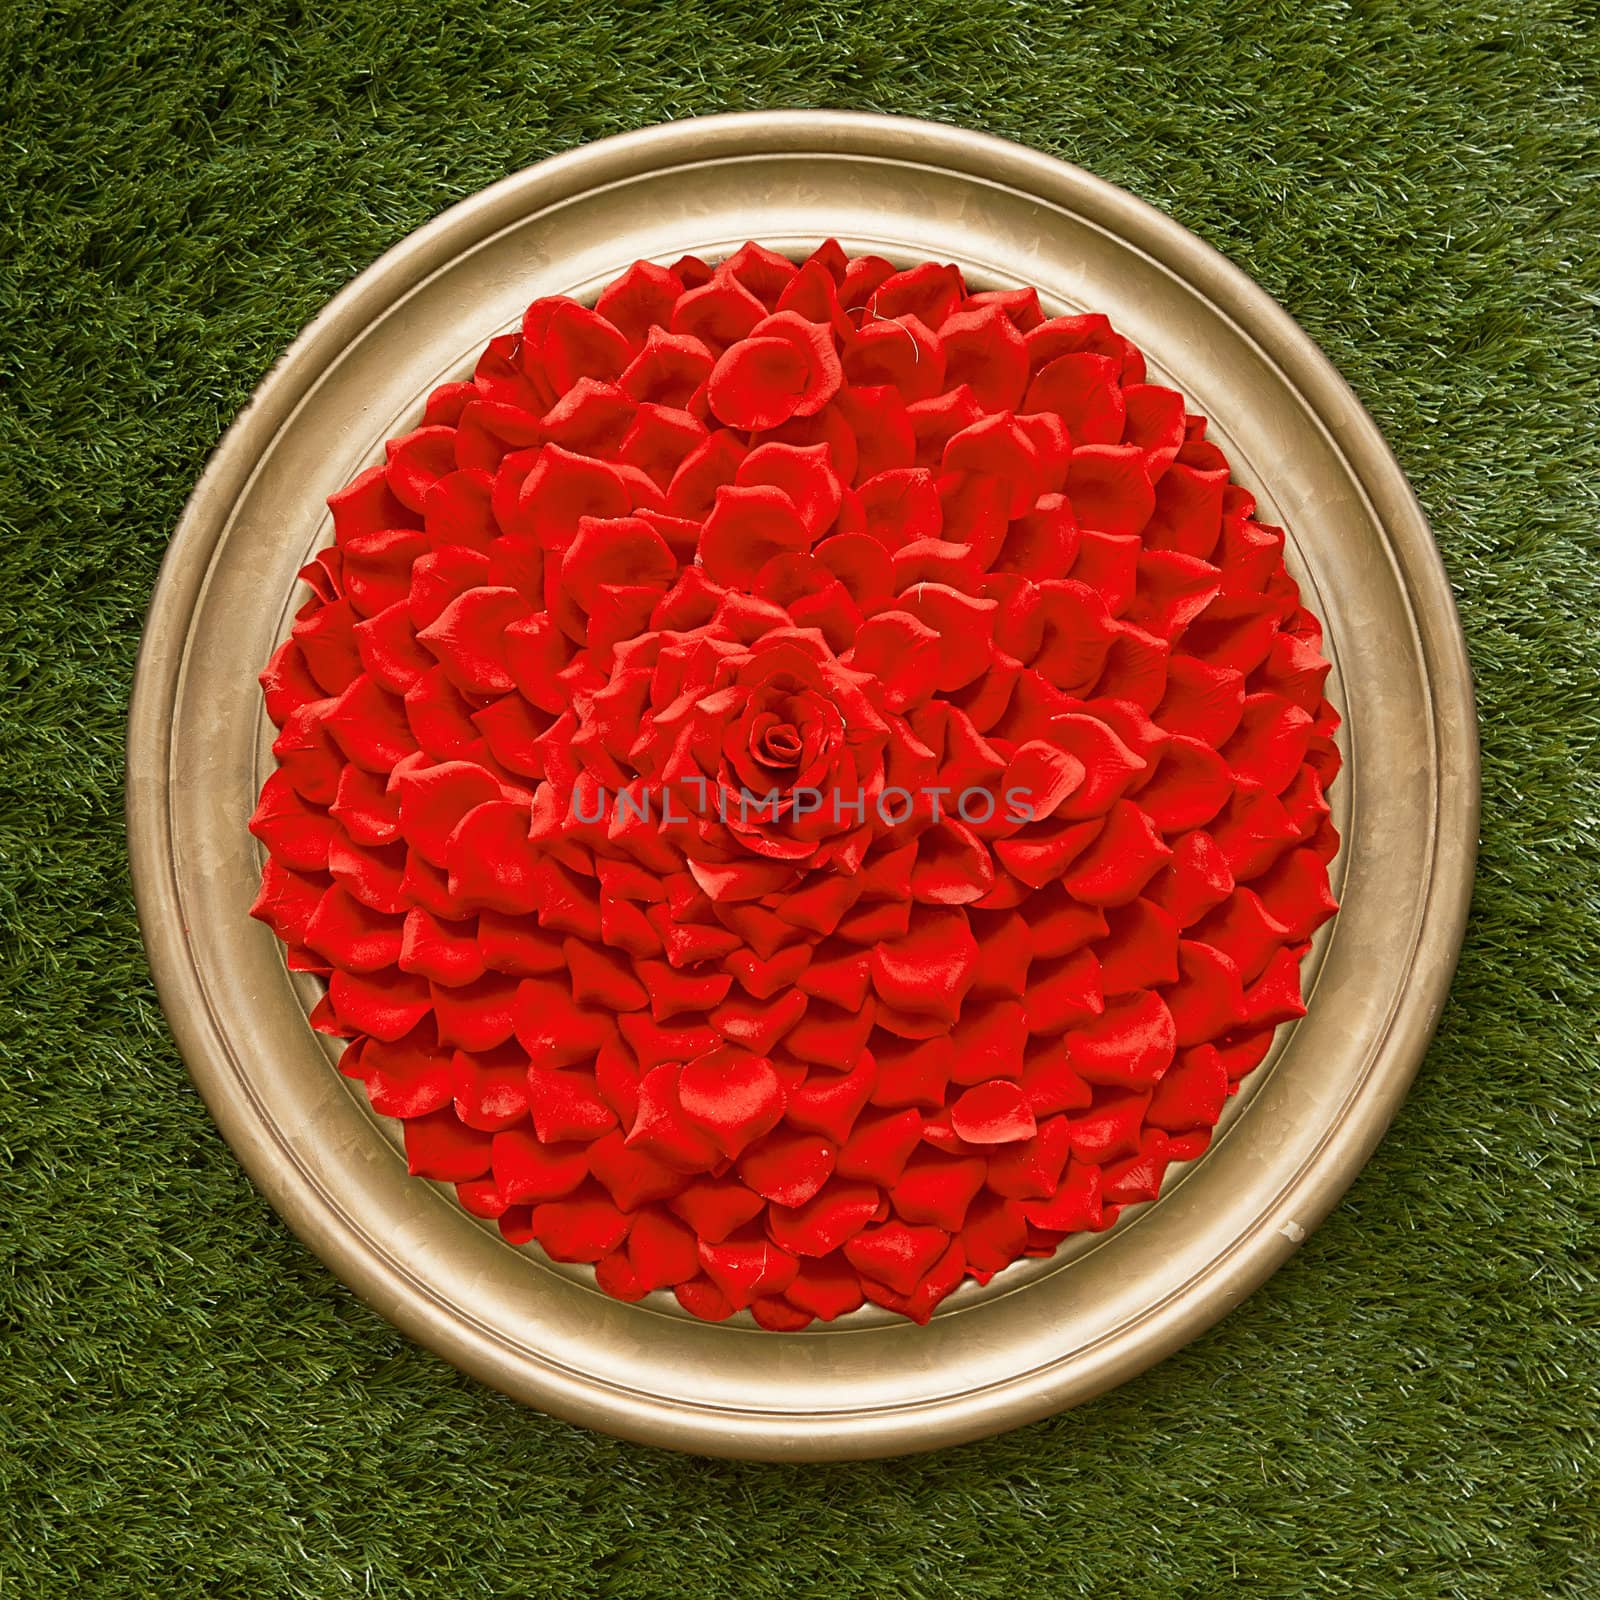  Classic round frame on green grass full of red petals